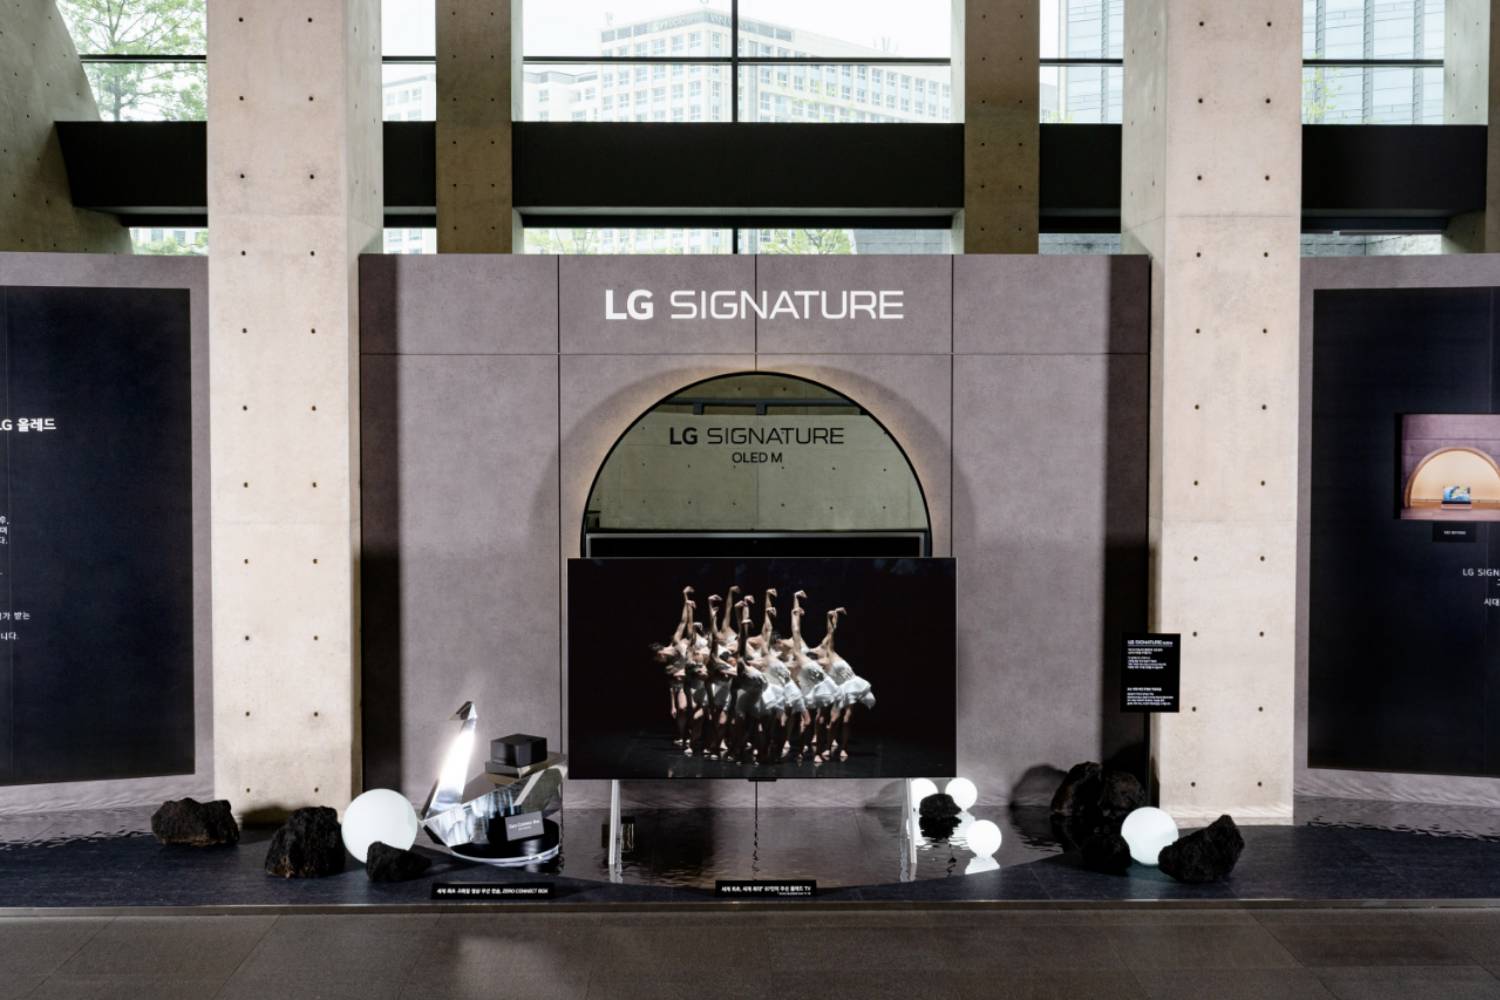 LG Host's Swan Lake Performance, Expanding, Engagement With Art and Culture Scene